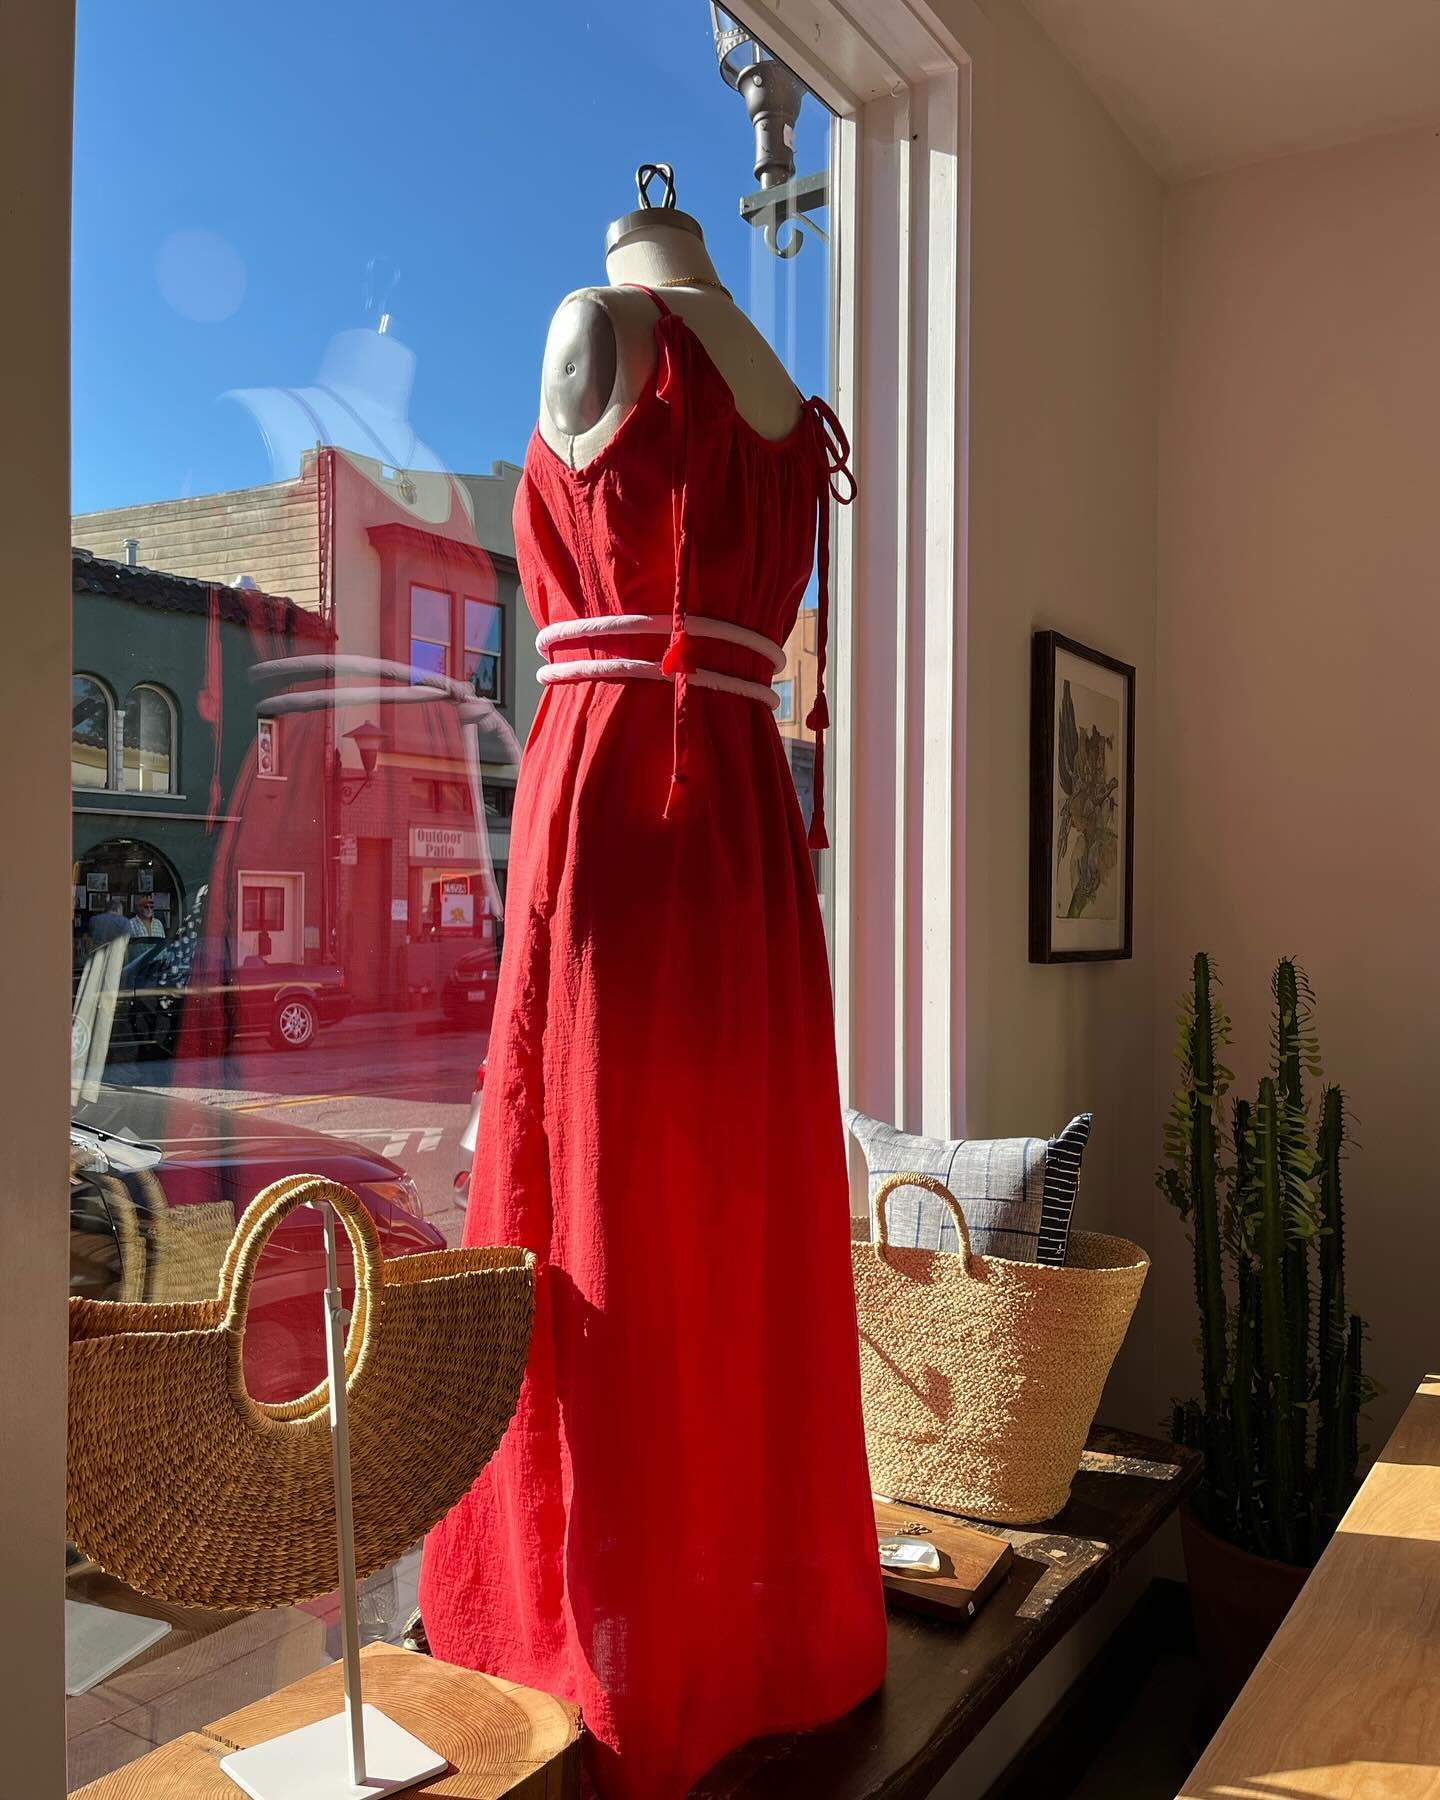 New Conifer maxi dress in a bright red cotton gauze 🥰 comes with a pink coded belt 
AND new straw bags from @indego_africa